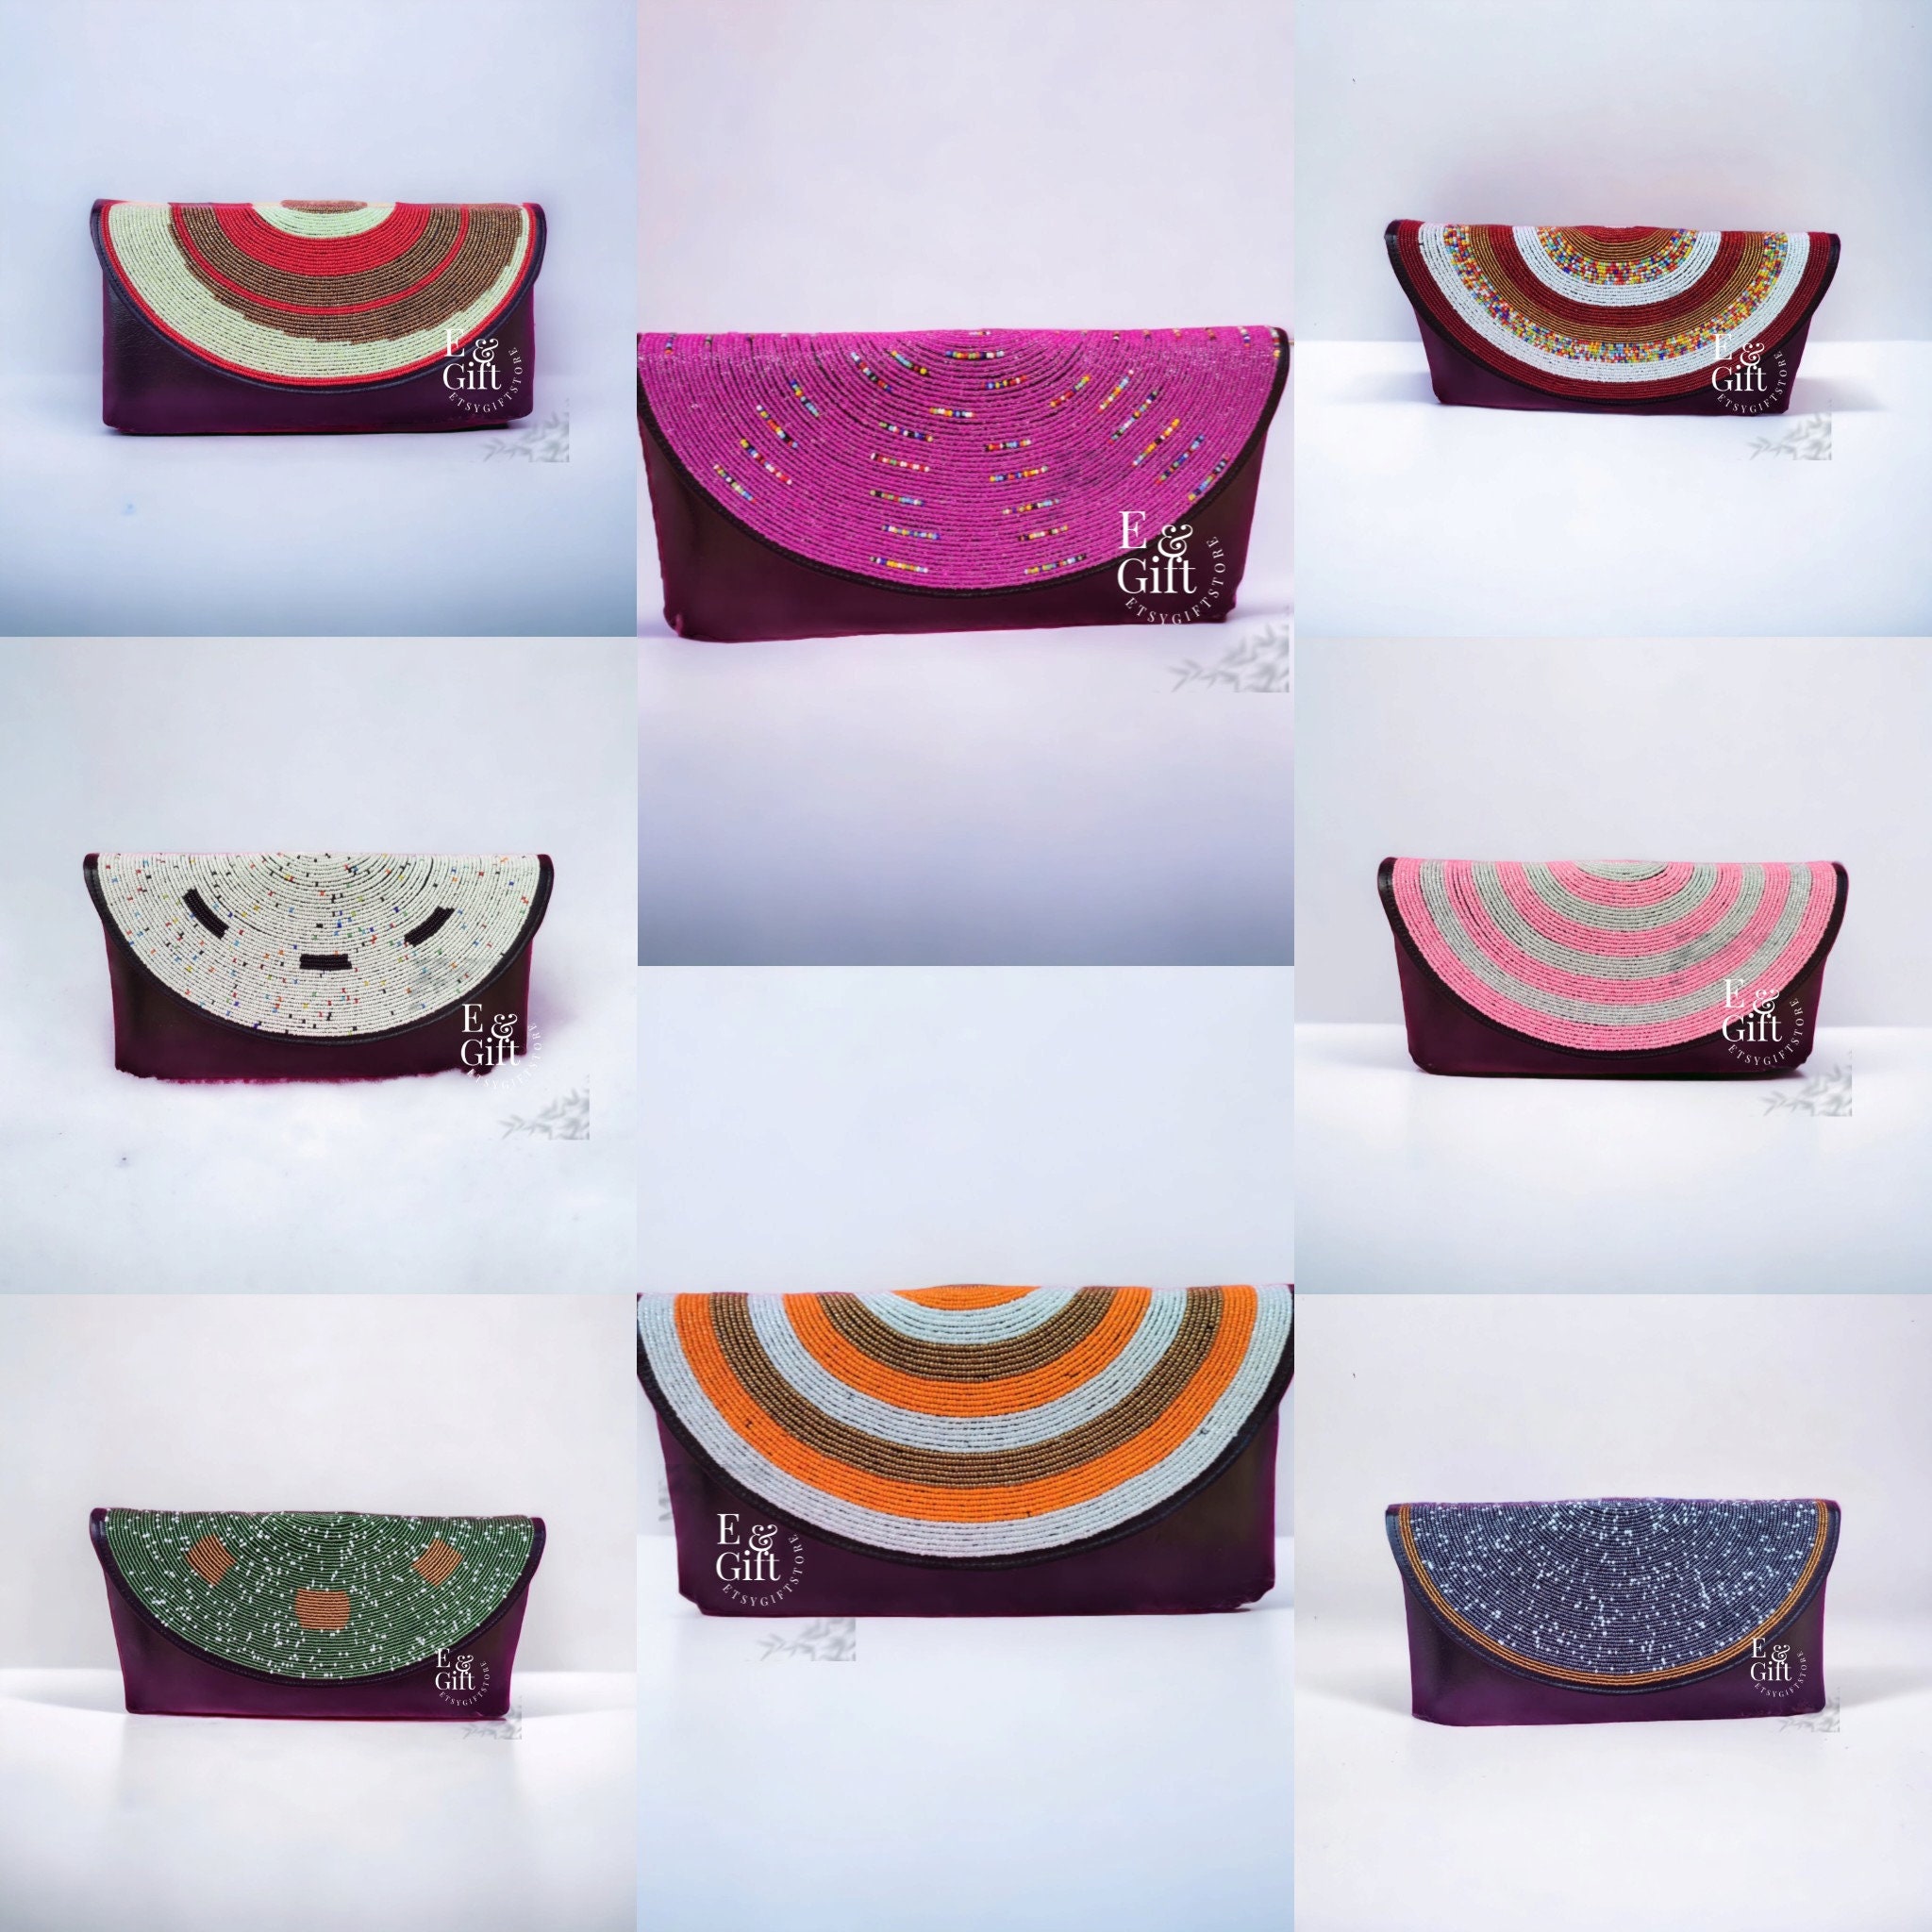 Wholesale Wristlet / Clutch Bag on Clearance in Assorted Colors